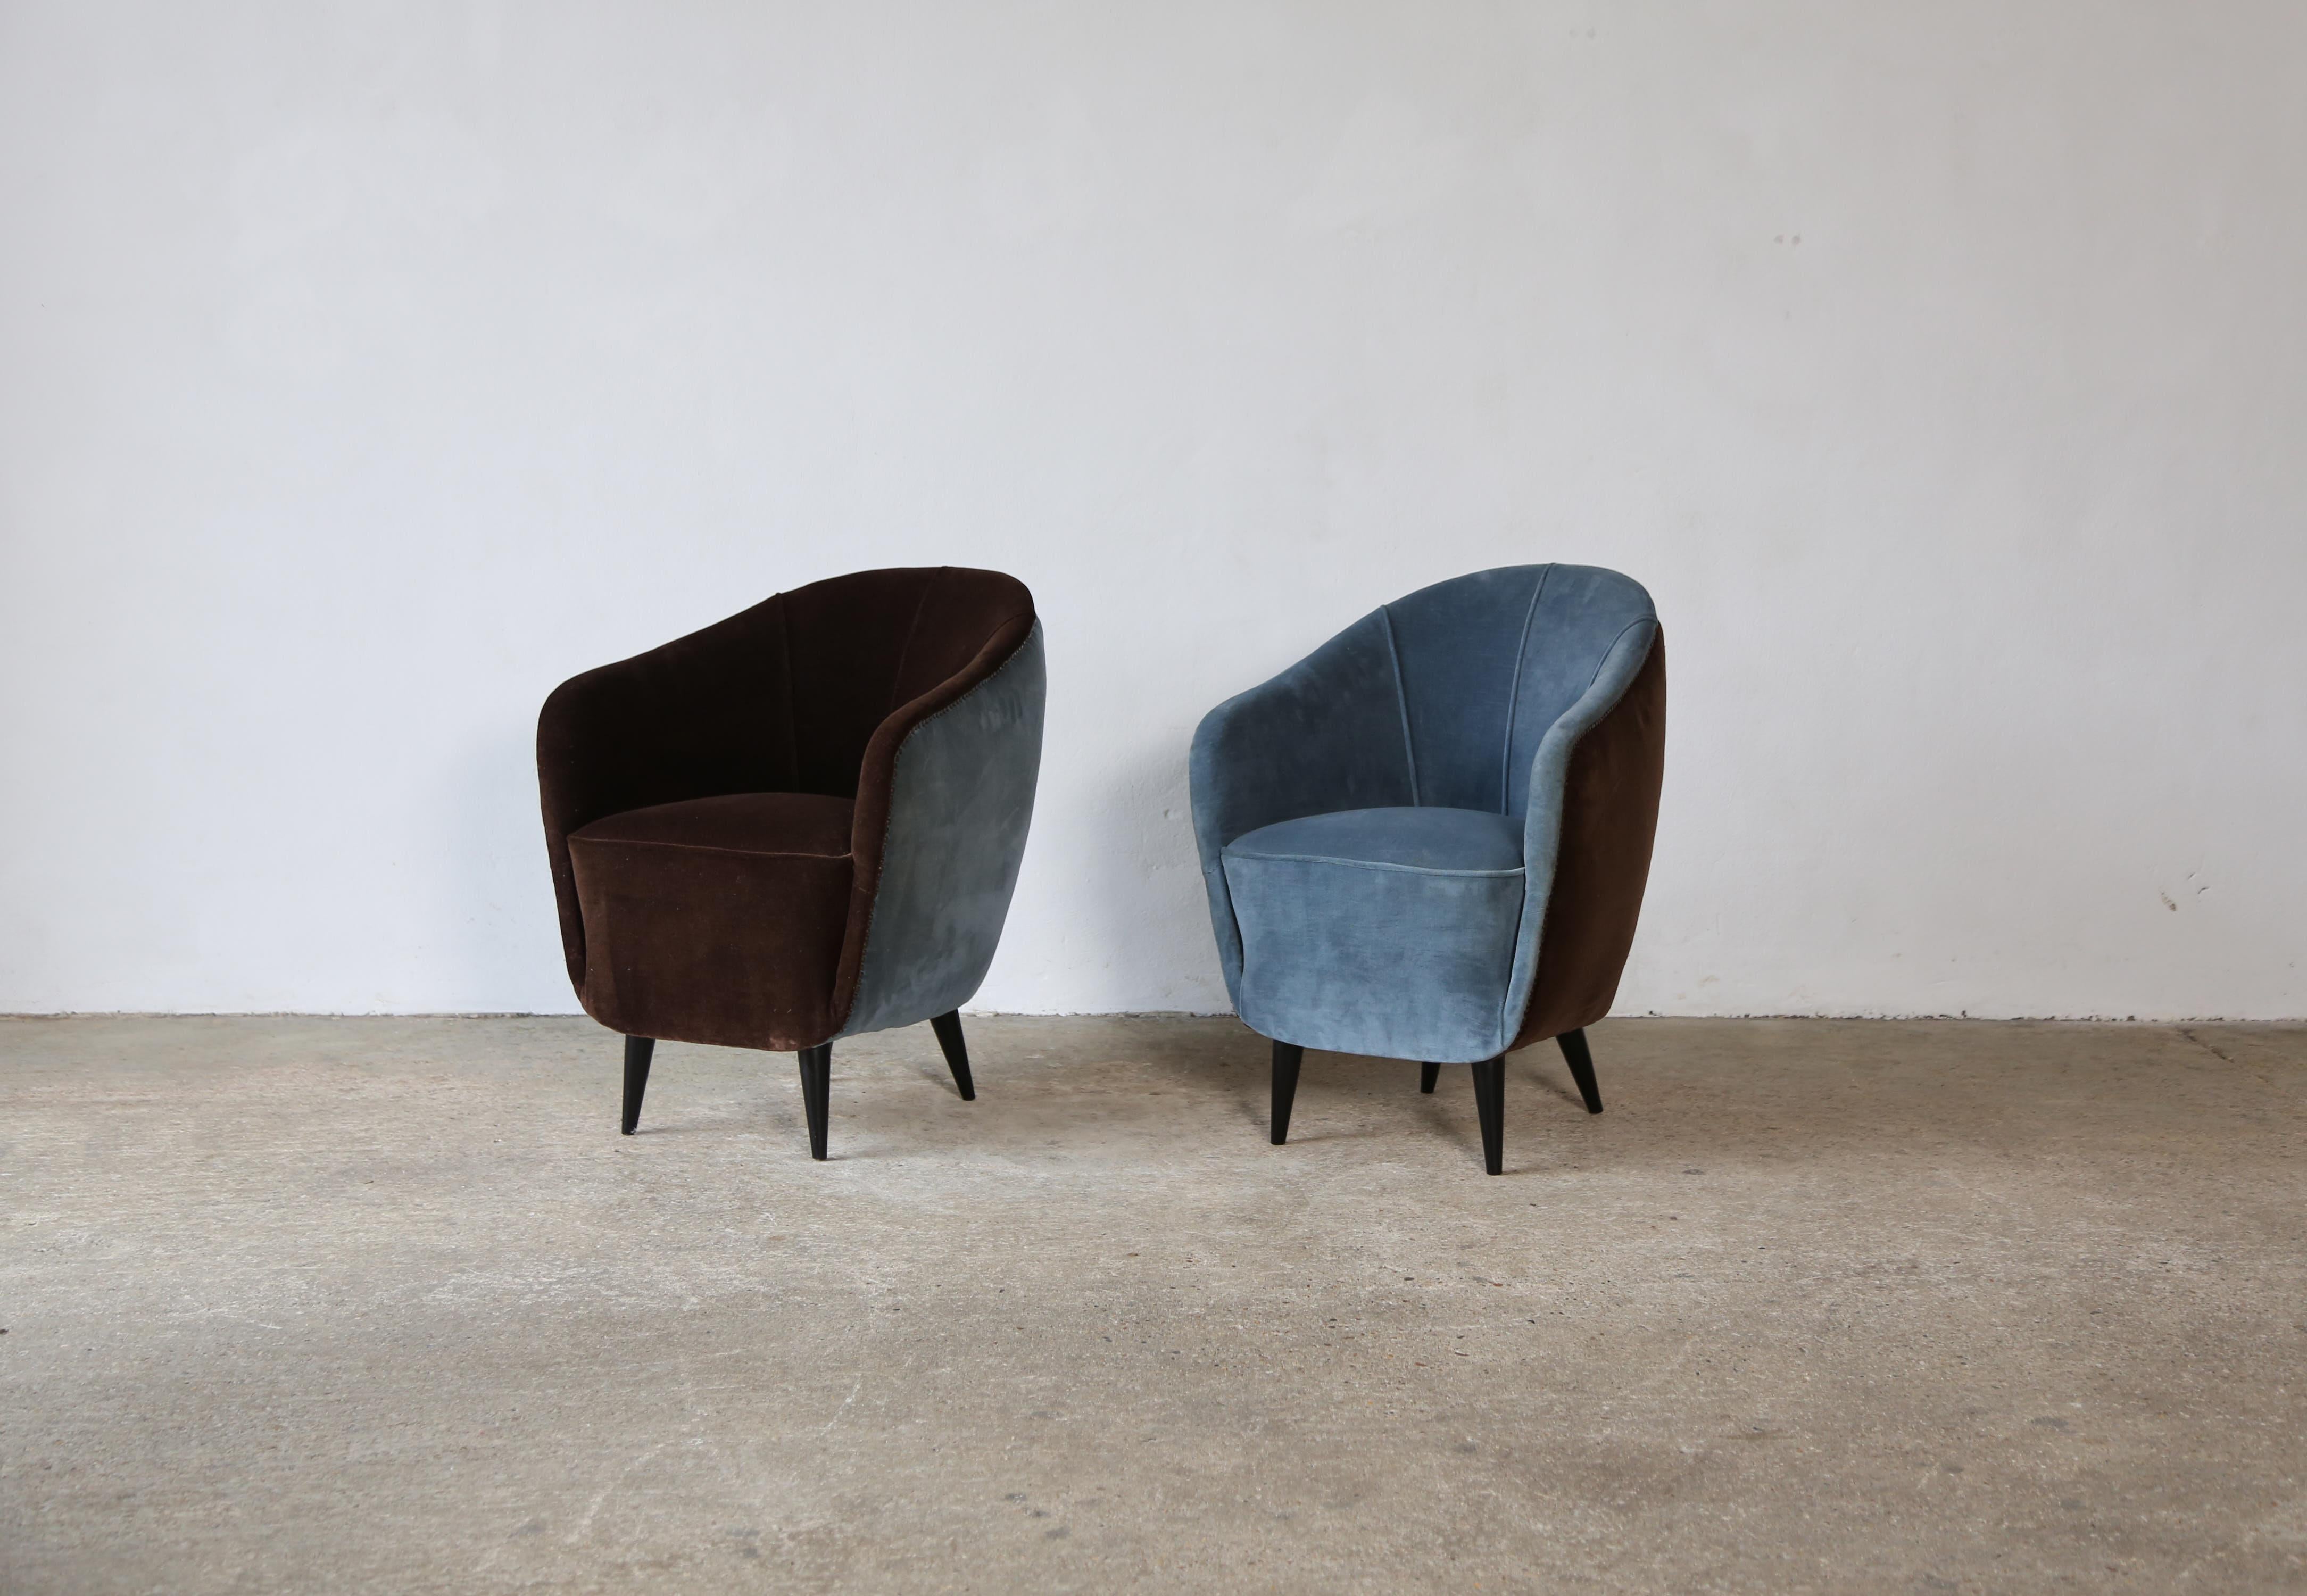 Italian Pair of Gio Ponti Style Chairs, Italy, 1960s For Sale